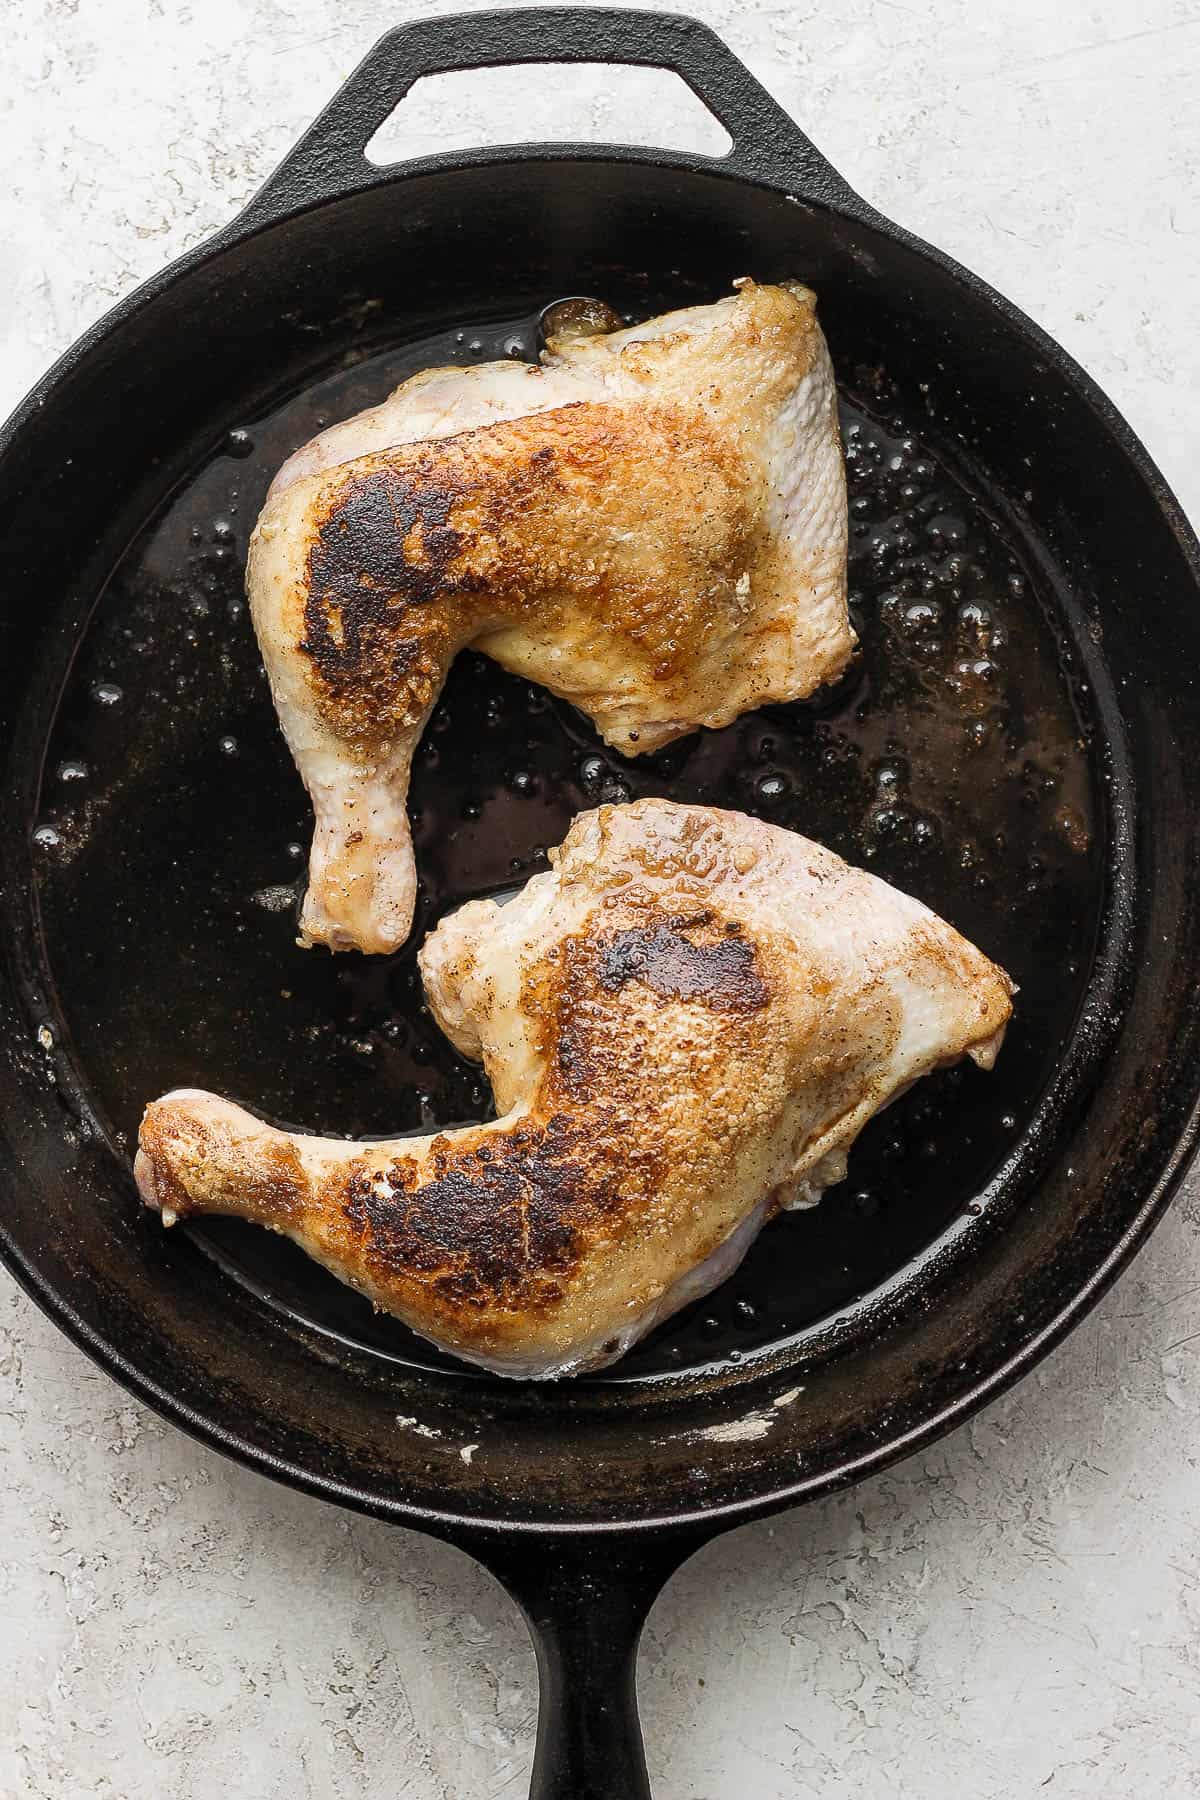 Chicken quarters being seared in a large cast iron skillet.